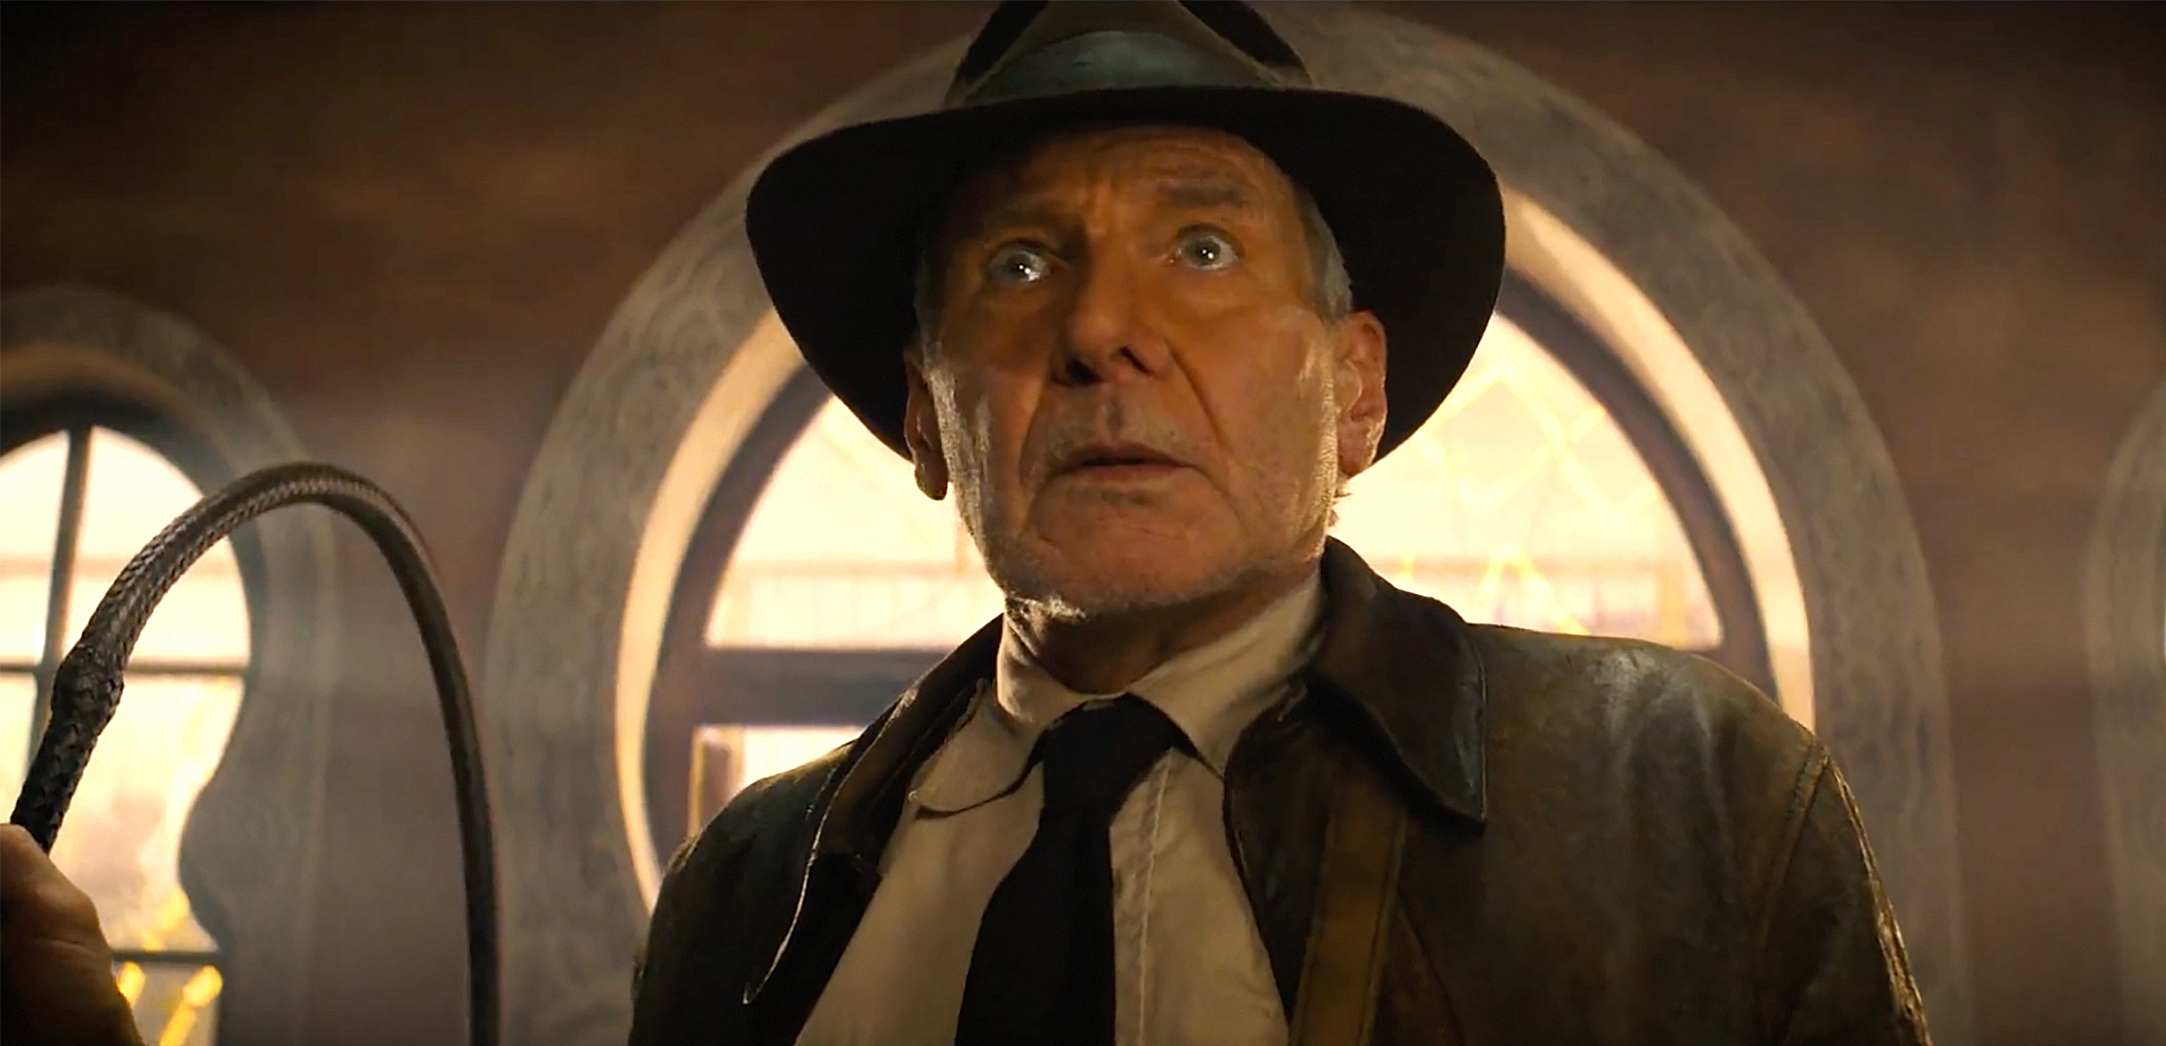 PHOTO: Harrison Ford as Indiana Jones in the upcoming movie, "Indiana Jones and the Dial of Destiny.